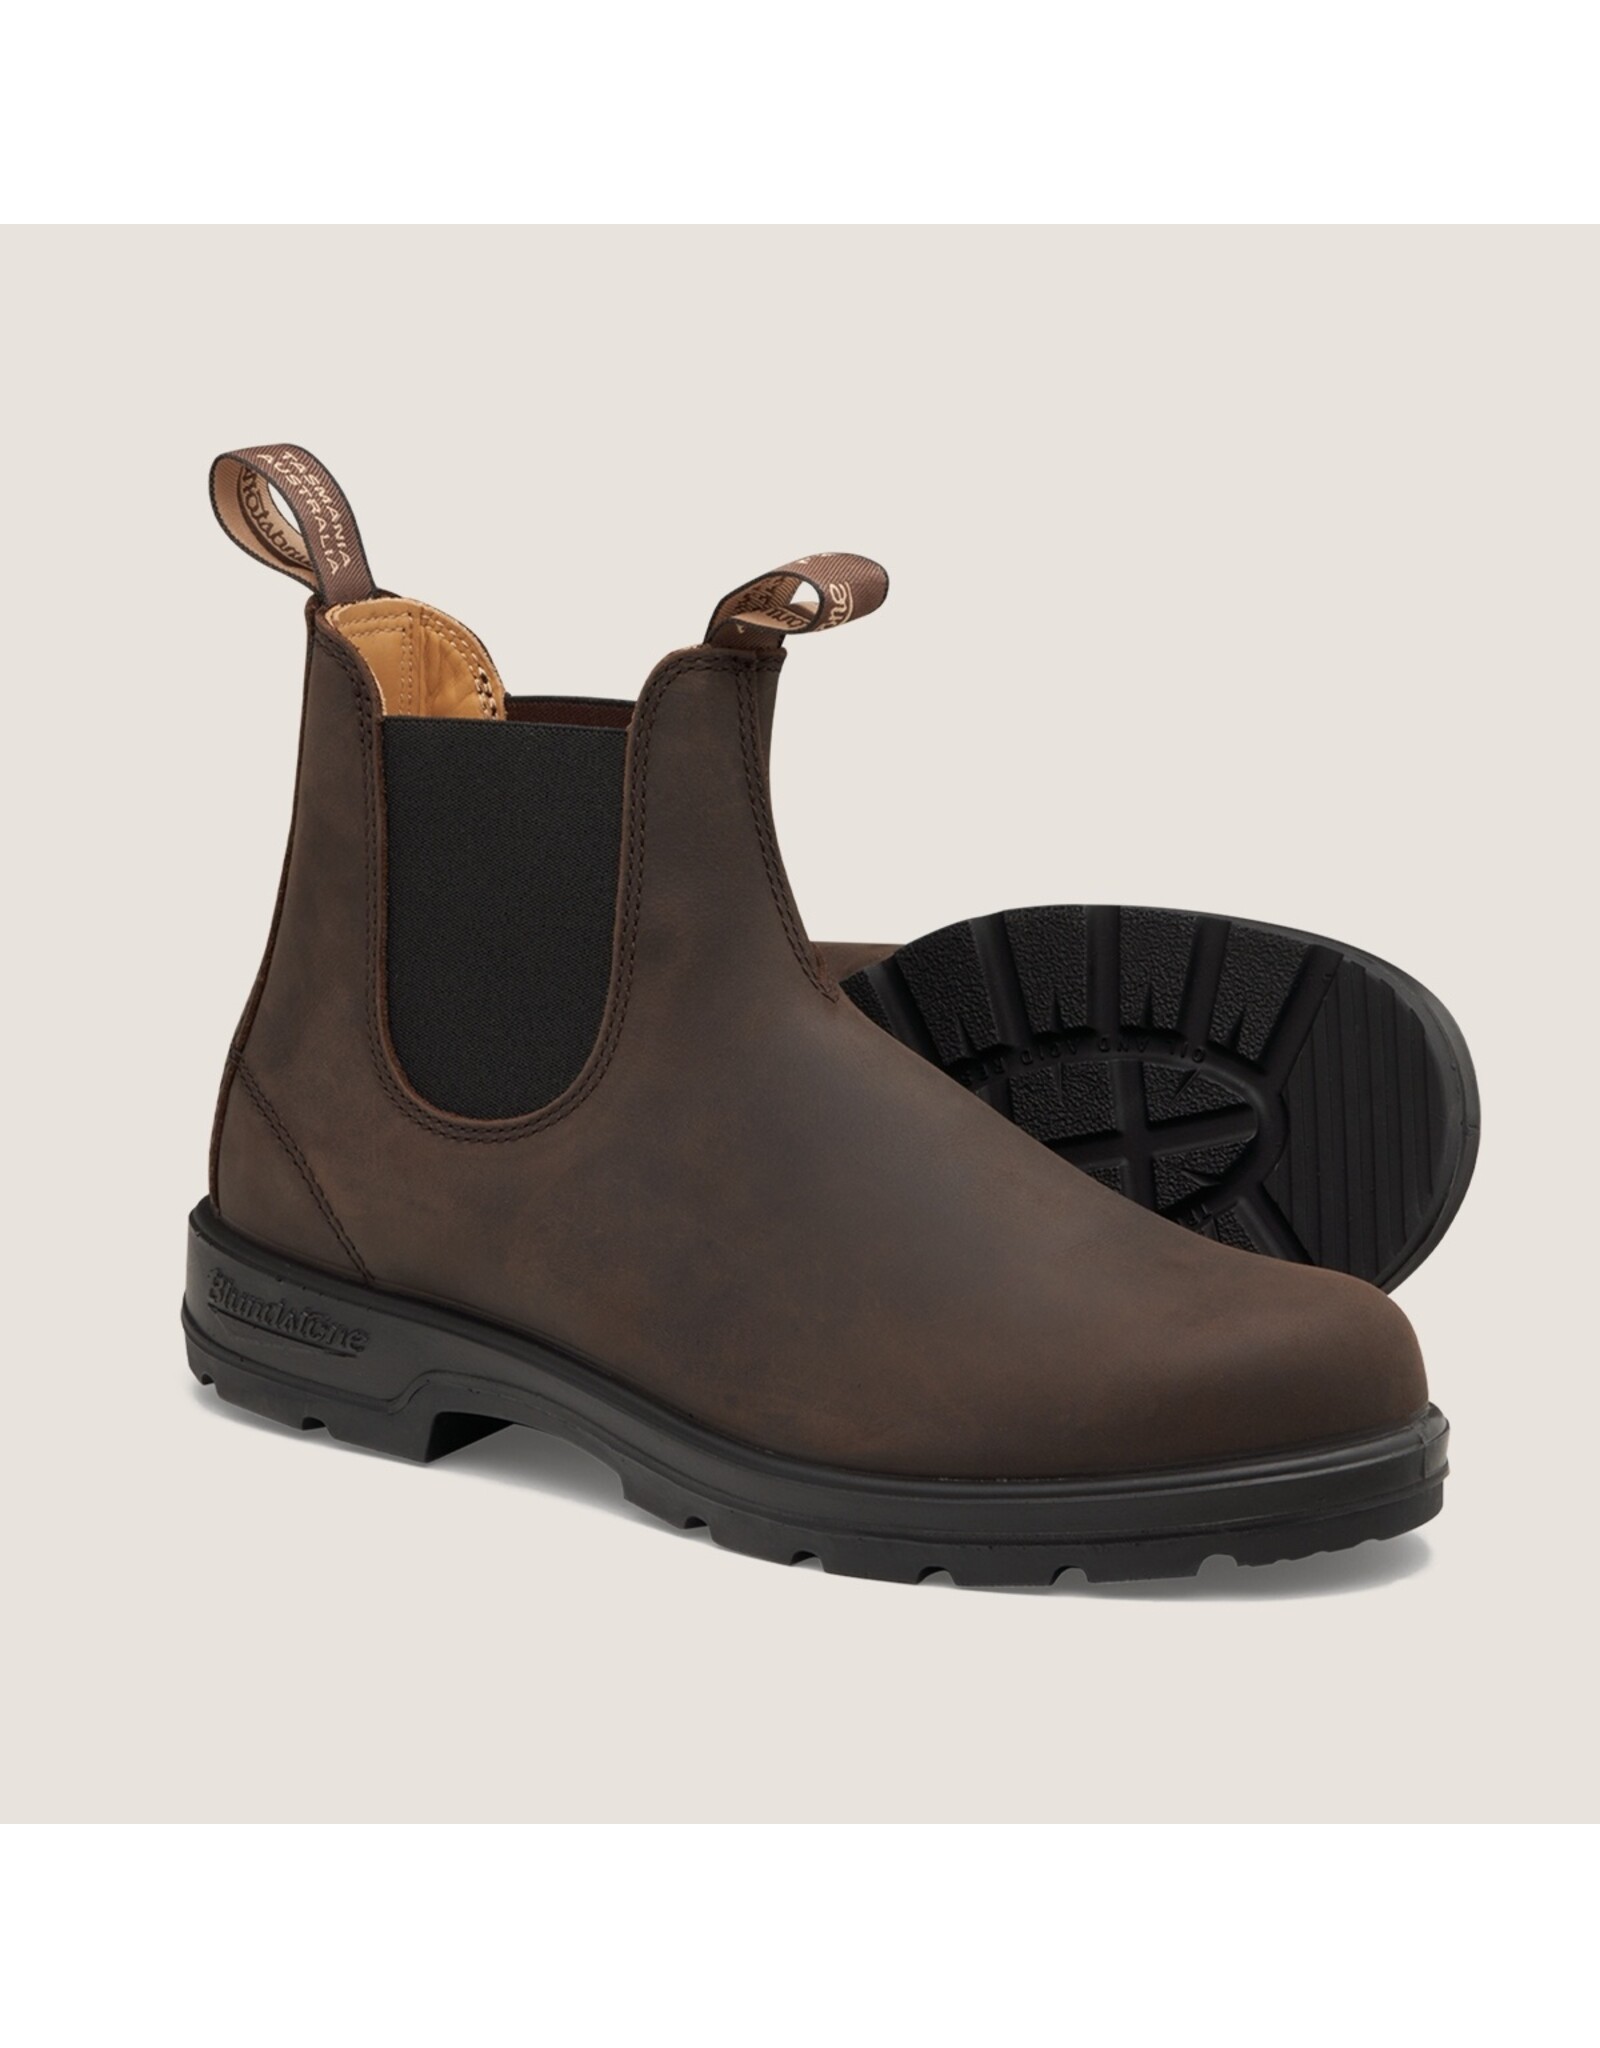 BLUNDSTONE CLASSIC CHELSEA BOOT-BROWN